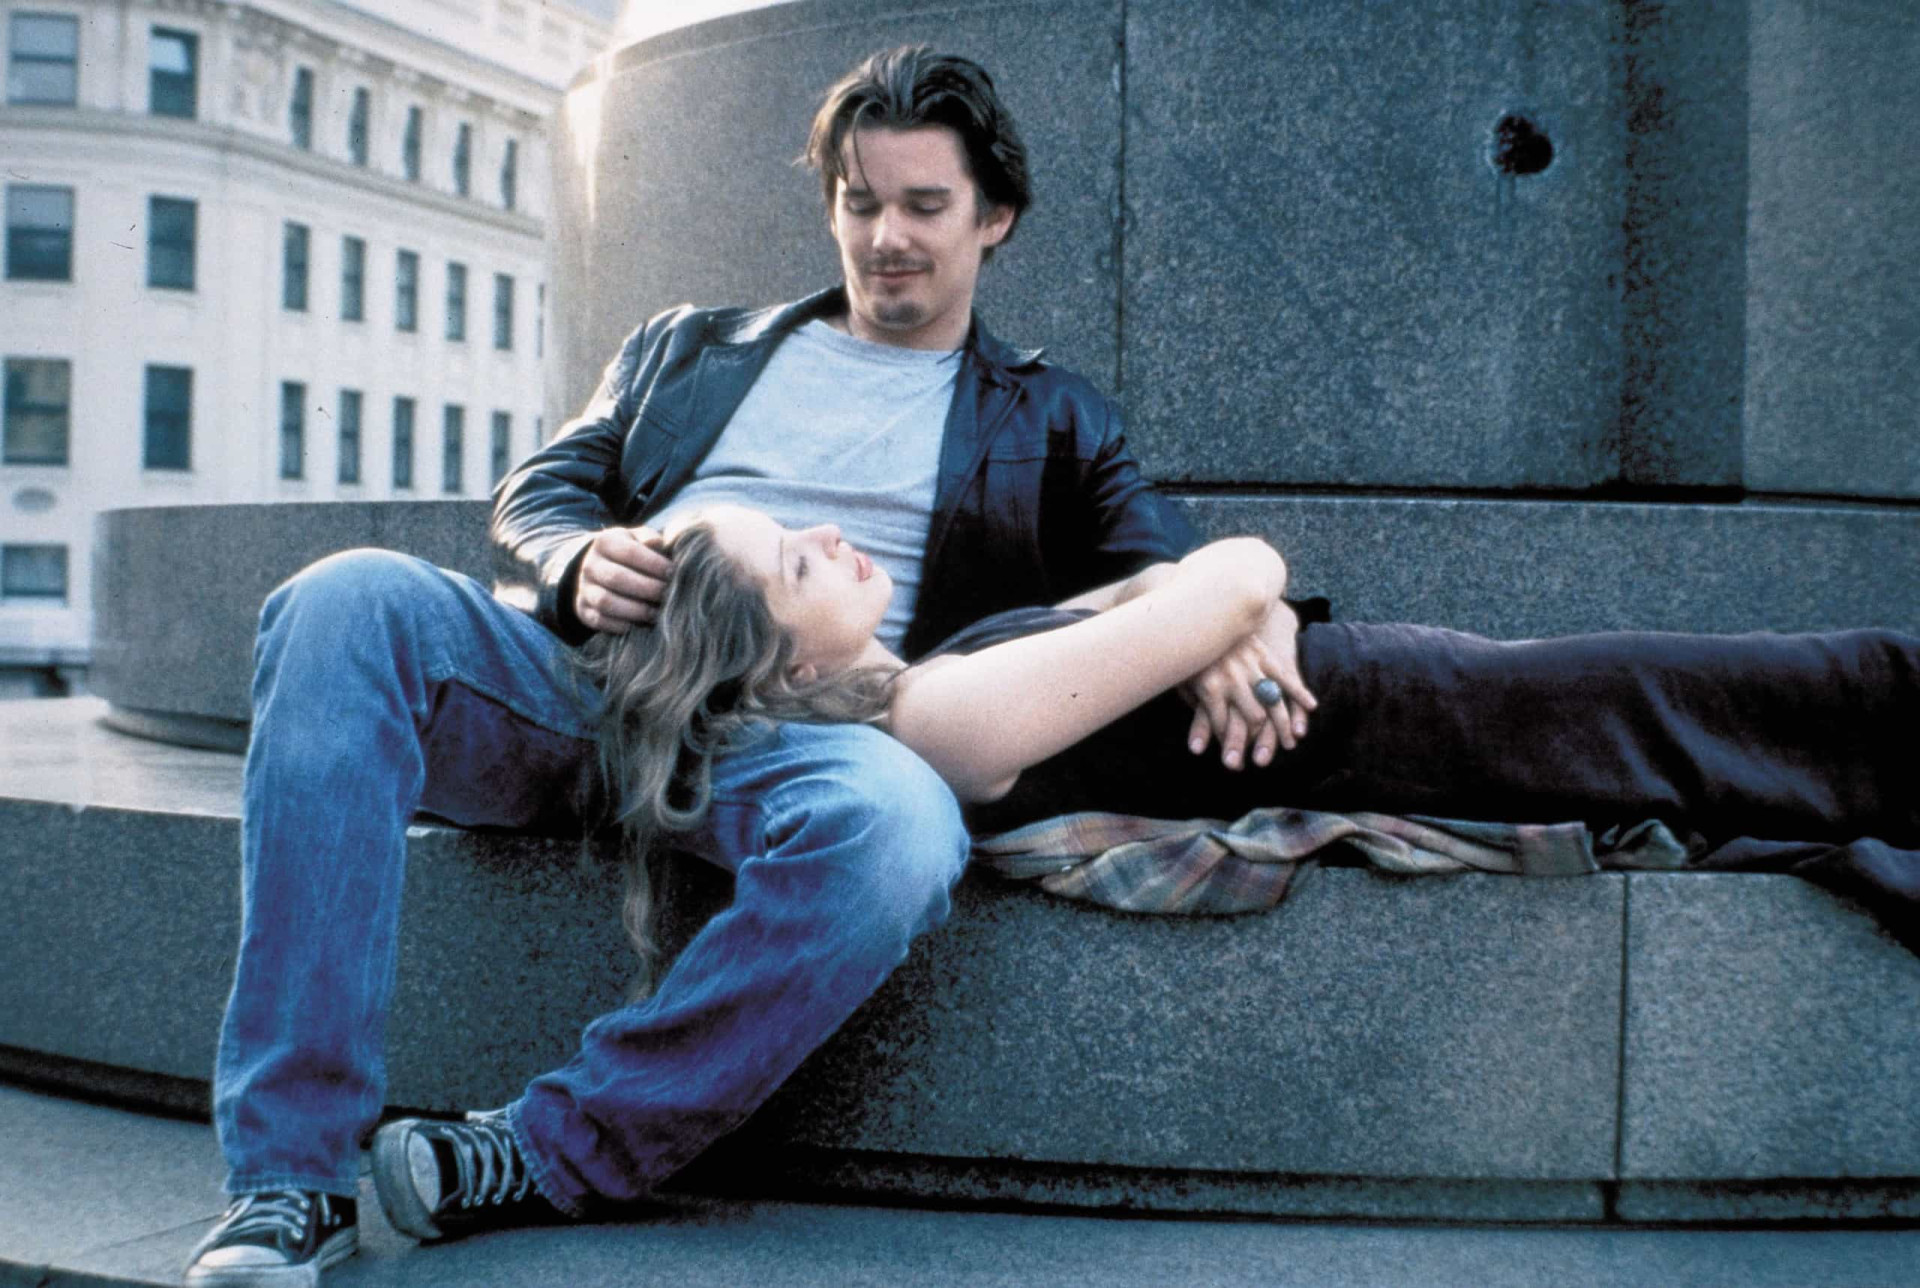 <p>A hallmark of any '90s kid is a crush on either one of these actors. Ethan Hawke and Julie Delpy play two characters who walk around Paris all night. They talk, flirt, and love, but only until sunrise.</p><p><a href="https://www.msn.com/en-us/community/channel/vid-7xx8mnucu55yw63we9va2gwr7uihbxwc68fxqp25x6tg4ftibpra?cvid=94631541bc0f4f89bfd59158d696ad7e">Follow us and access great exclusive content every day</a></p>